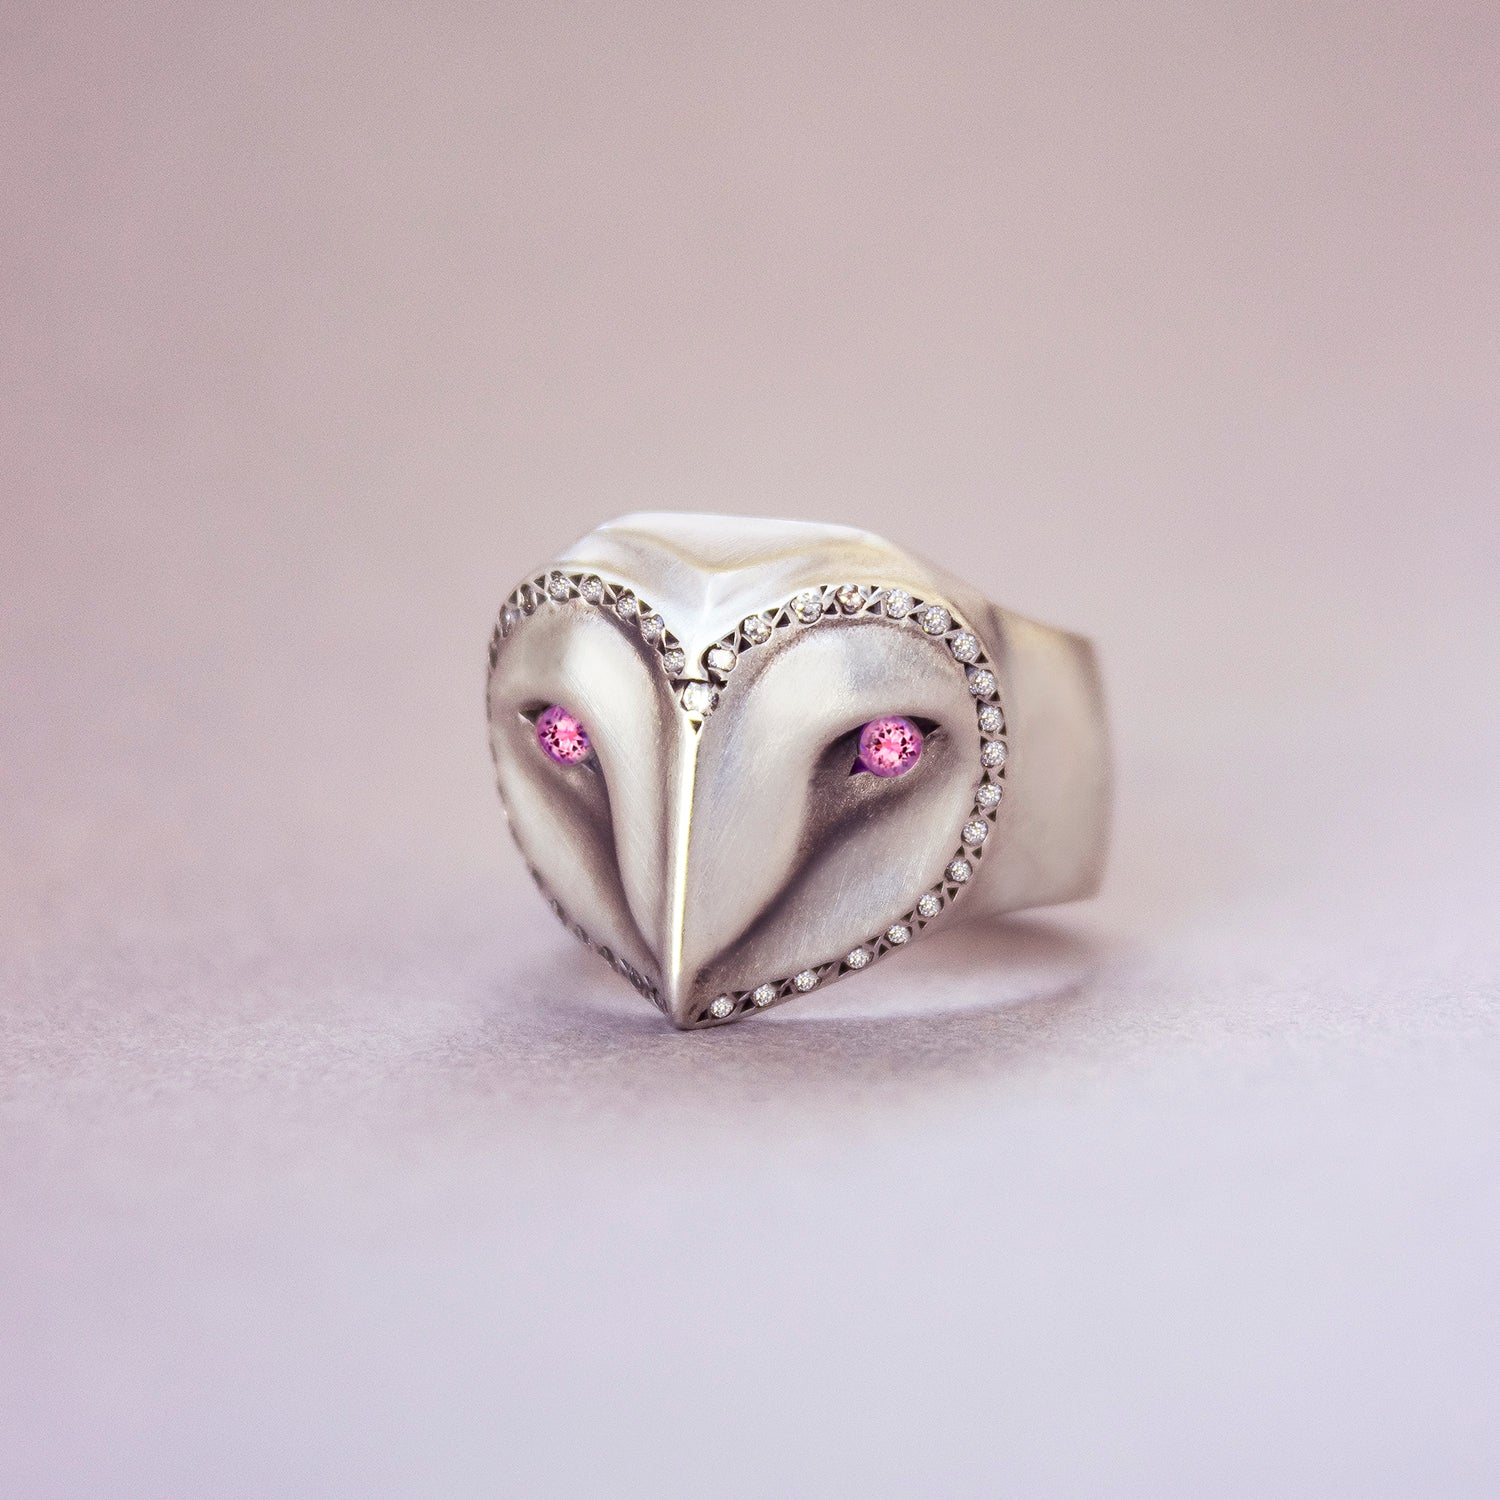 ELINA GLEIZER Limited Edition Barn Owl Ring with Diamonds and Tourmalines